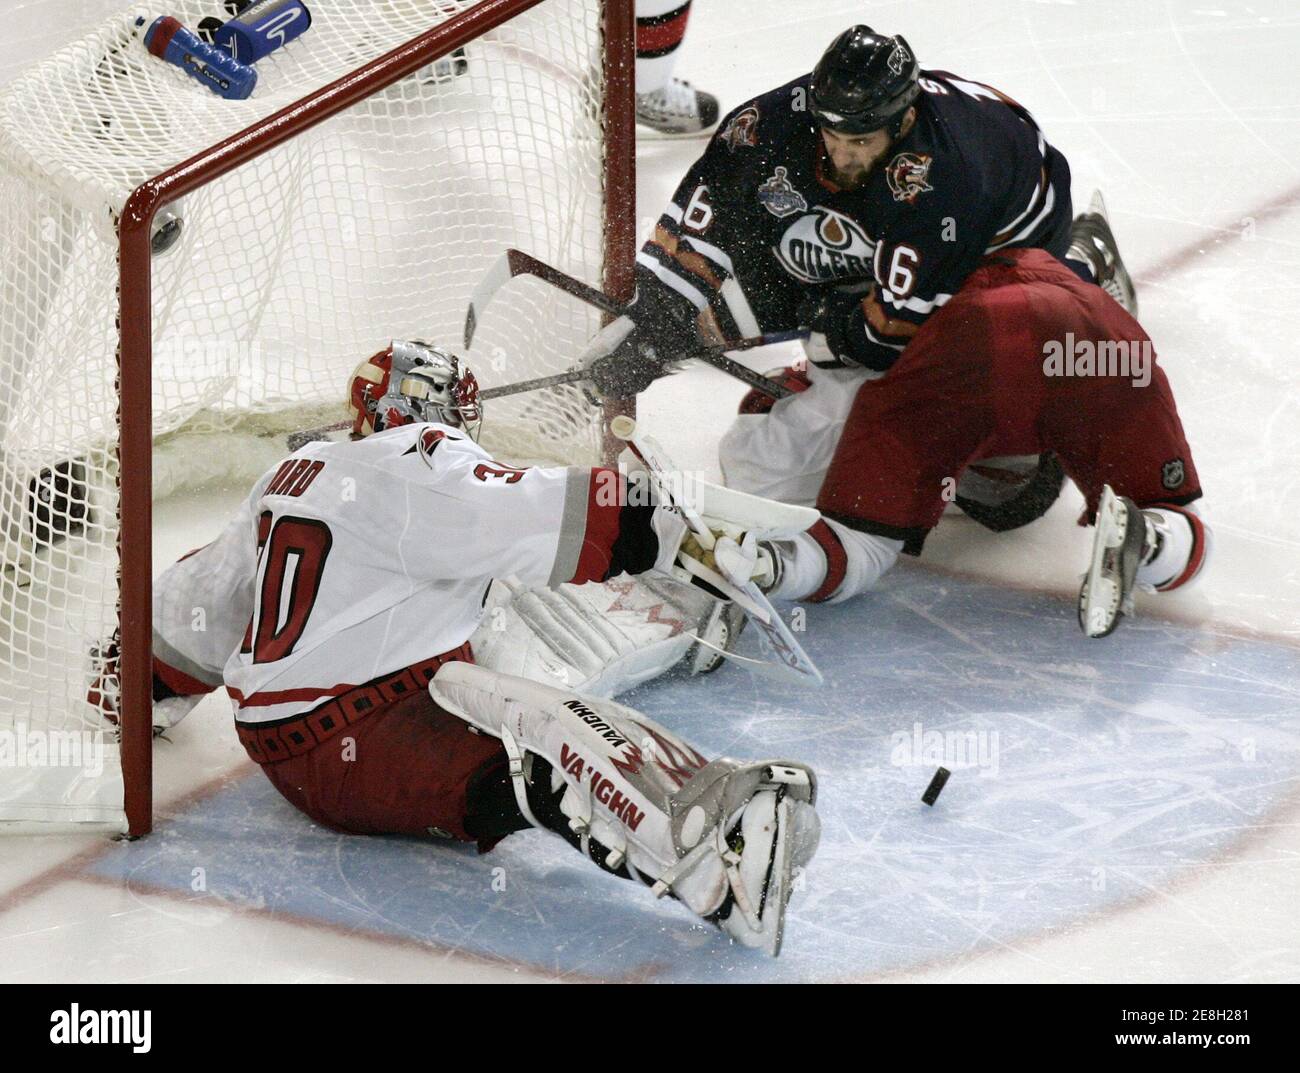 Carolina Hurricanes goalie Cam Ward (L) makes a save as Edmonton Oilers' Jarret Stoll (C) holds down Carolina Hurricanes' Matt Cullen during the second period of Game 3 in their Stanley Cup Finals ice hockey game in Edmonton, Alberta June 10, 2006. Stoll was given a holding penalty on the play. REUTERS/Andy Clark (CANADA) Stock Photo